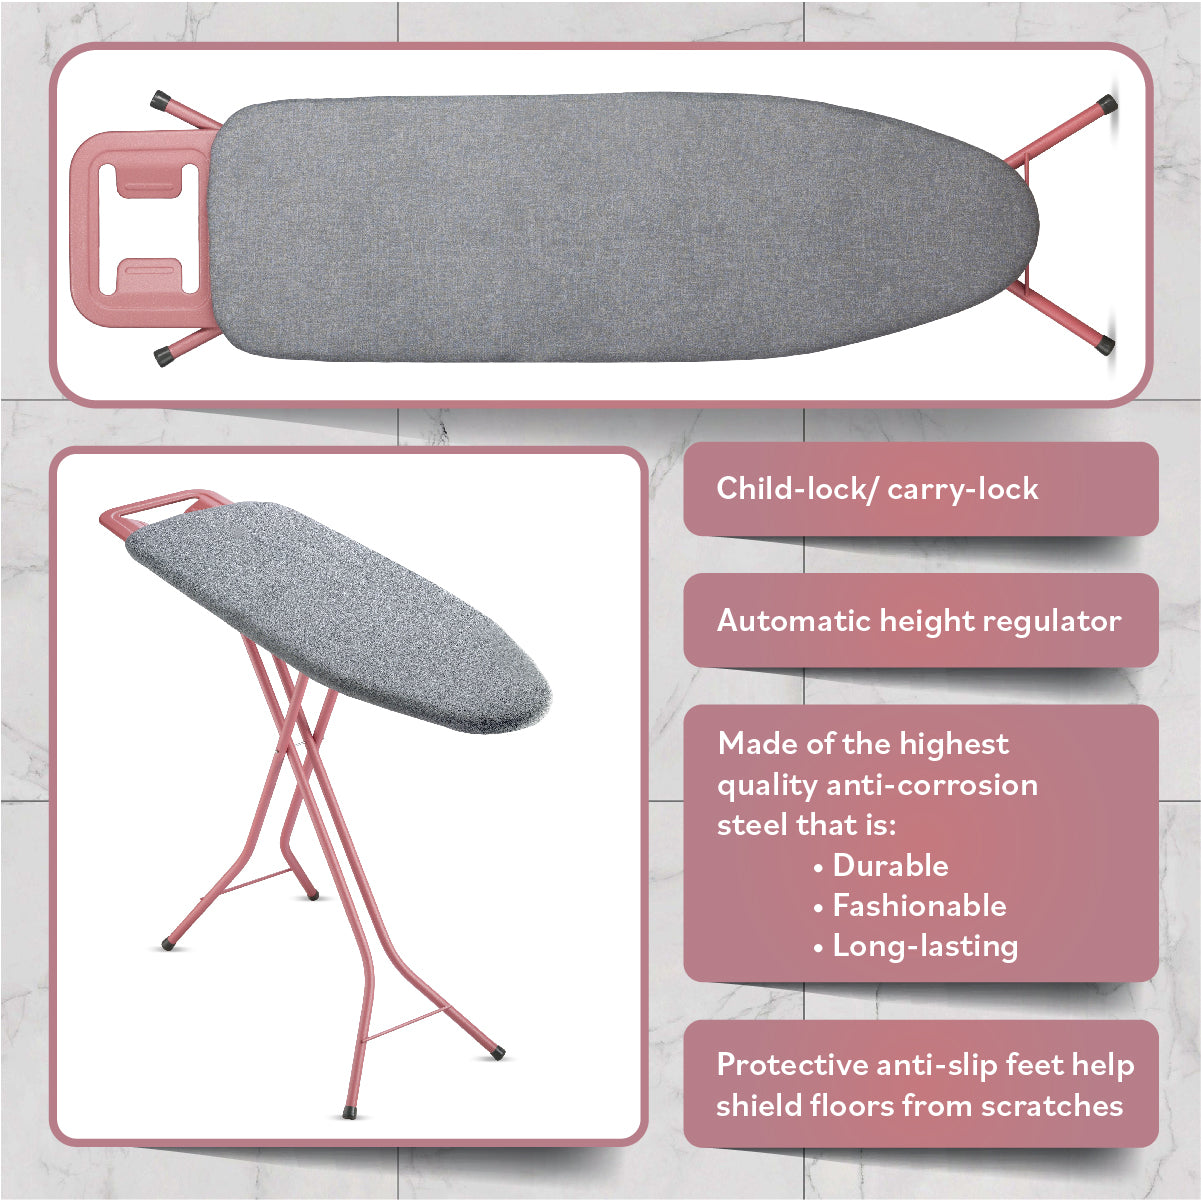 Bartnelli Ironing Board Made in Europe | Iron Board with 4 Layered Cover & Pad, Height Adjustable up to 36" Features A Safety Iron Rest, 4 Steel Rose Legs, for Home Laundry Room or Dorm Use (43x14) (ROSE LEGS GRAY COVER)